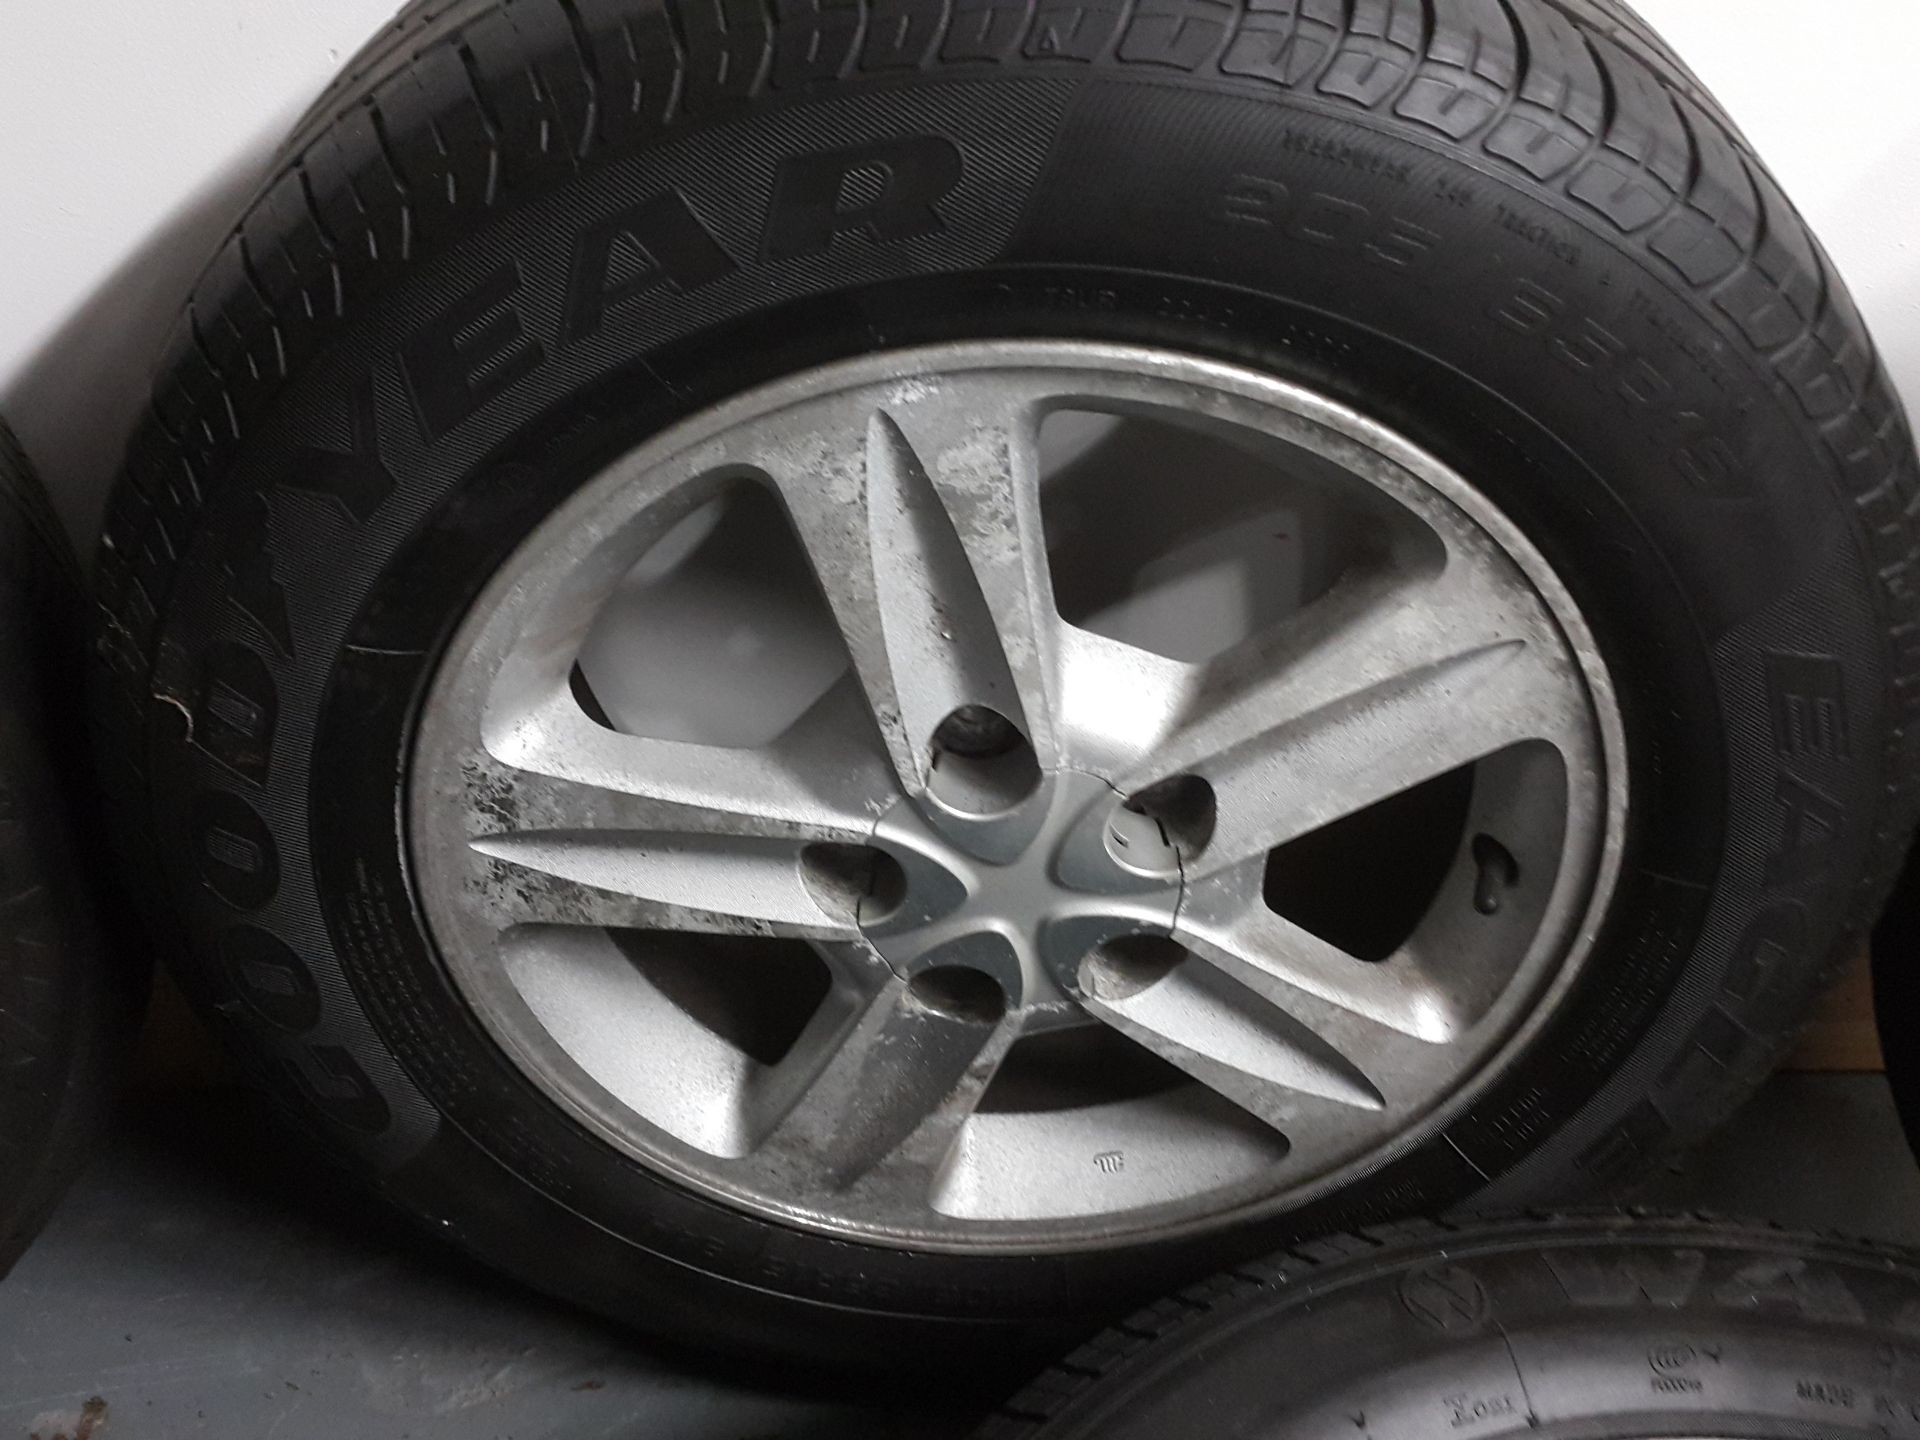 5 X TOYOTA PREVIA 15" ALLOY WHEELS WITH TYRES 205/65/15 (2 GOODYEAR 2 OTHERS) - Image 4 of 11